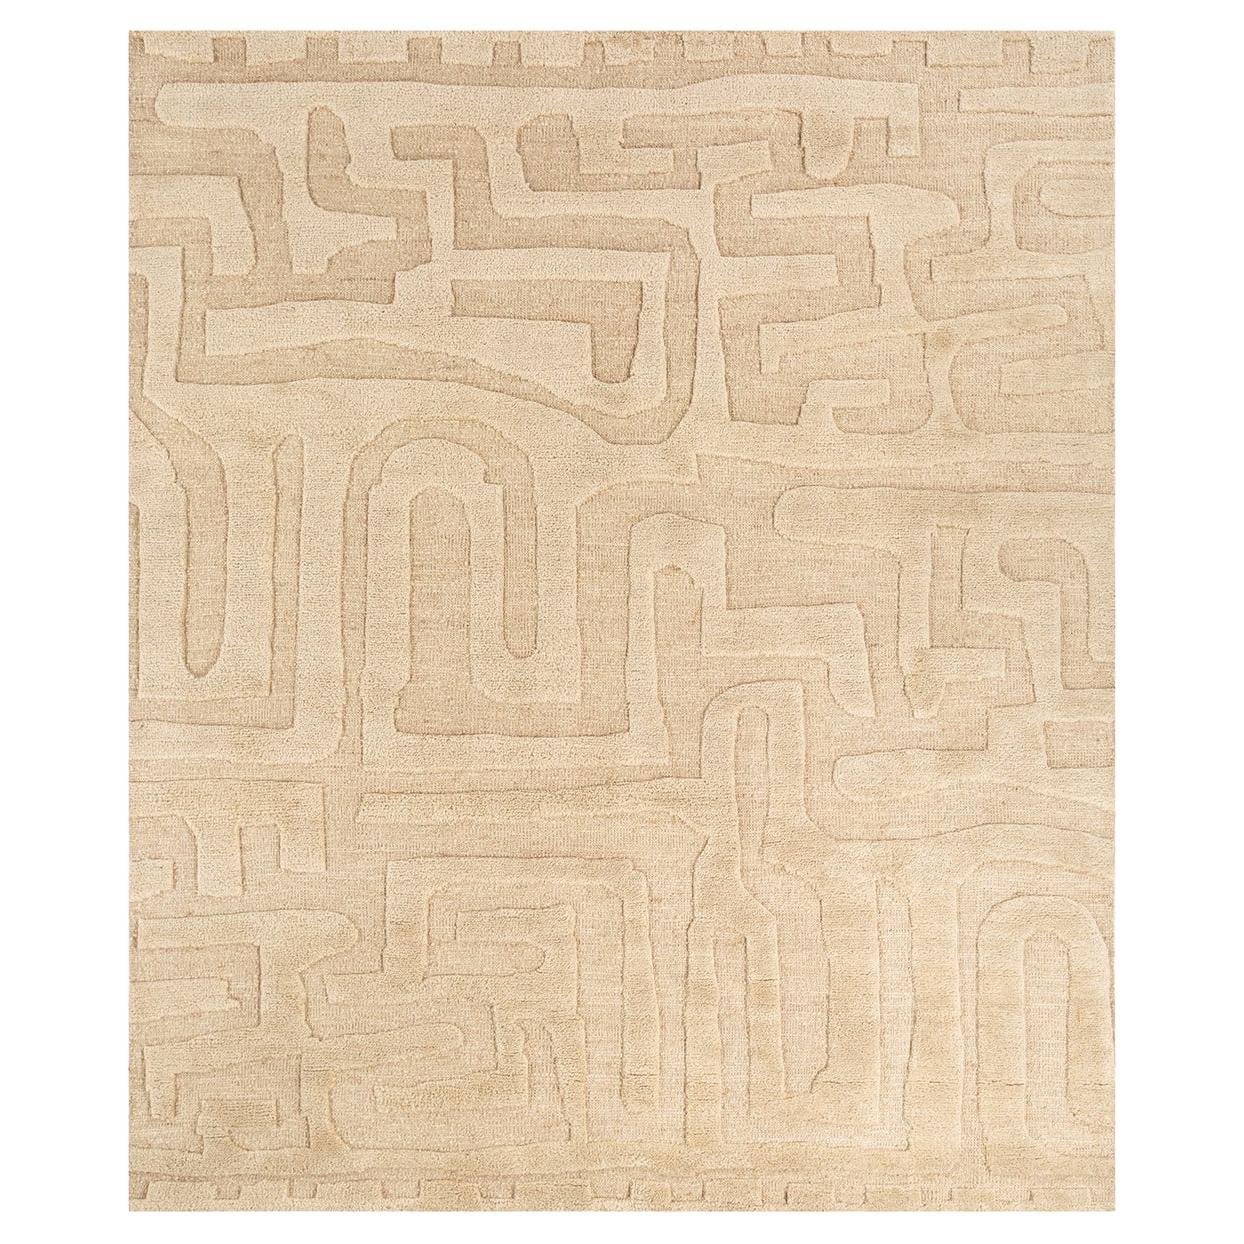 Maze Rug by Rural Weavers, Knotted, Wool, 240x300cm For Sale